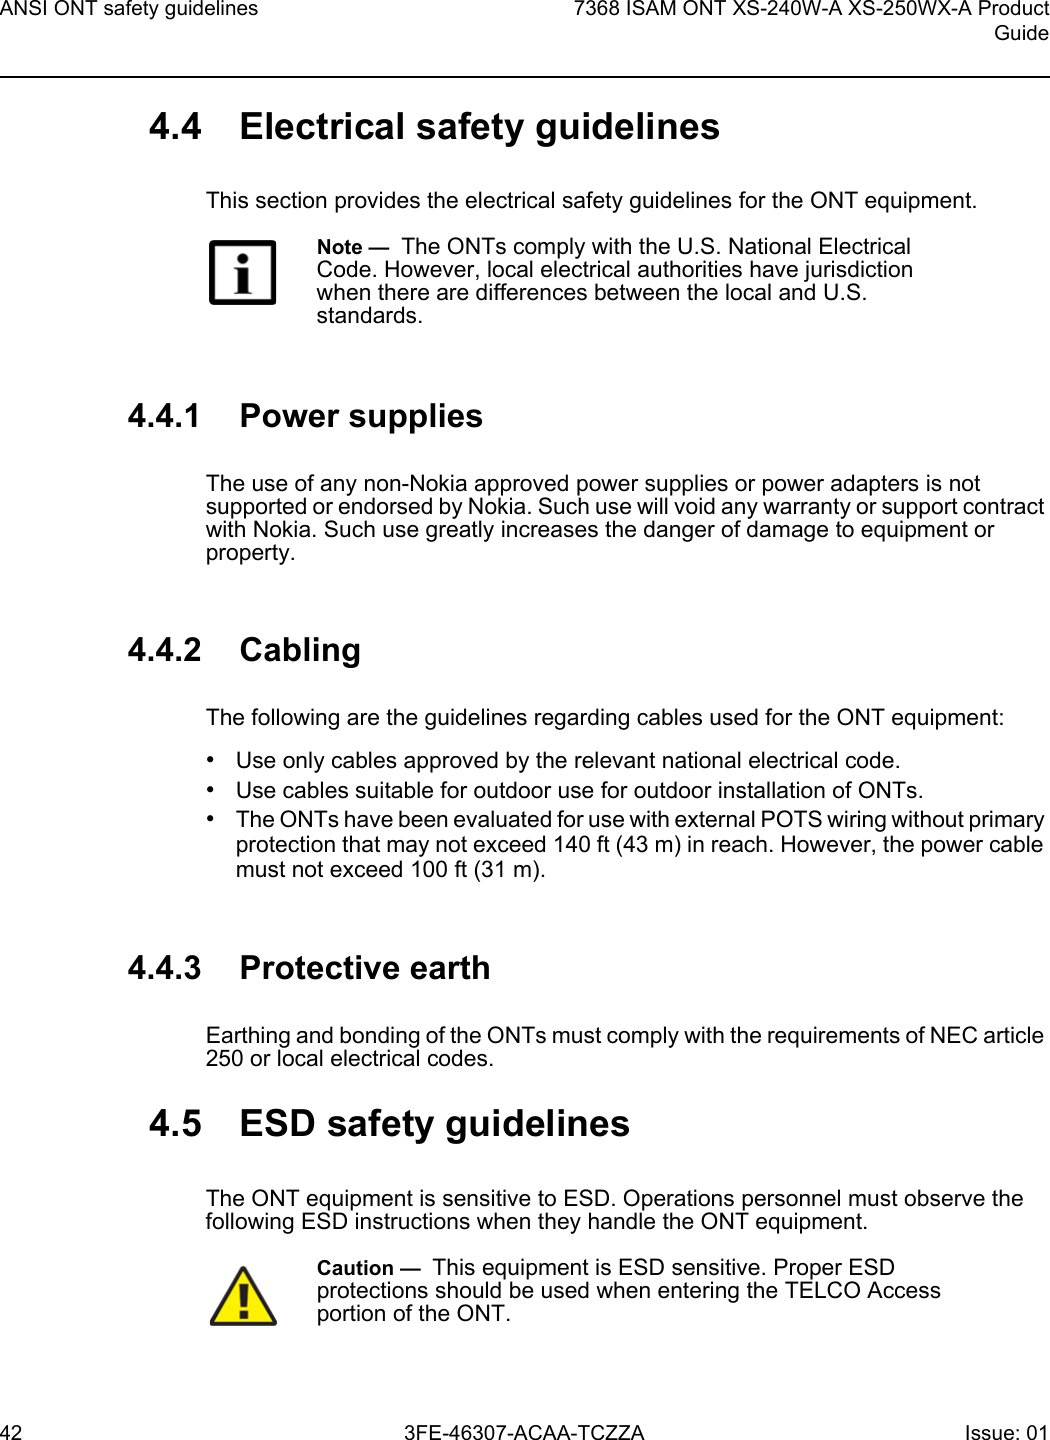 ANSI ONT safety guidelines427368 ISAM ONT XS-240W-A XS-250WX-A ProductGuide3FE-46307-ACAA-TCZZA Issue: 01 4.4 Electrical safety guidelinesThis section provides the electrical safety guidelines for the ONT equipment.4.4.1 Power suppliesThe use of any non-Nokia approved power supplies or power adapters is not supported or endorsed by Nokia. Such use will void any warranty or support contract with Nokia. Such use greatly increases the danger of damage to equipment or property.4.4.2 CablingThe following are the guidelines regarding cables used for the ONT equipment:•Use only cables approved by the relevant national electrical code.•Use cables suitable for outdoor use for outdoor installation of ONTs.•The ONTs have been evaluated for use with external POTS wiring without primary protection that may not exceed 140 ft (43 m) in reach. However, the power cable must not exceed 100 ft (31 m).4.4.3 Protective earthEarthing and bonding of the ONTs must comply with the requirements of NEC article 250 or local electrical codes.4.5 ESD safety guidelinesThe ONT equipment is sensitive to ESD. Operations personnel must observe the following ESD instructions when they handle the ONT equipment. Note —  The ONTs comply with the U.S. National Electrical Code. However, local electrical authorities have jurisdiction when there are differences between the local and U.S. standards.Caution —  This equipment is ESD sensitive. Proper ESD protections should be used when entering the TELCO Access portion of the ONT.